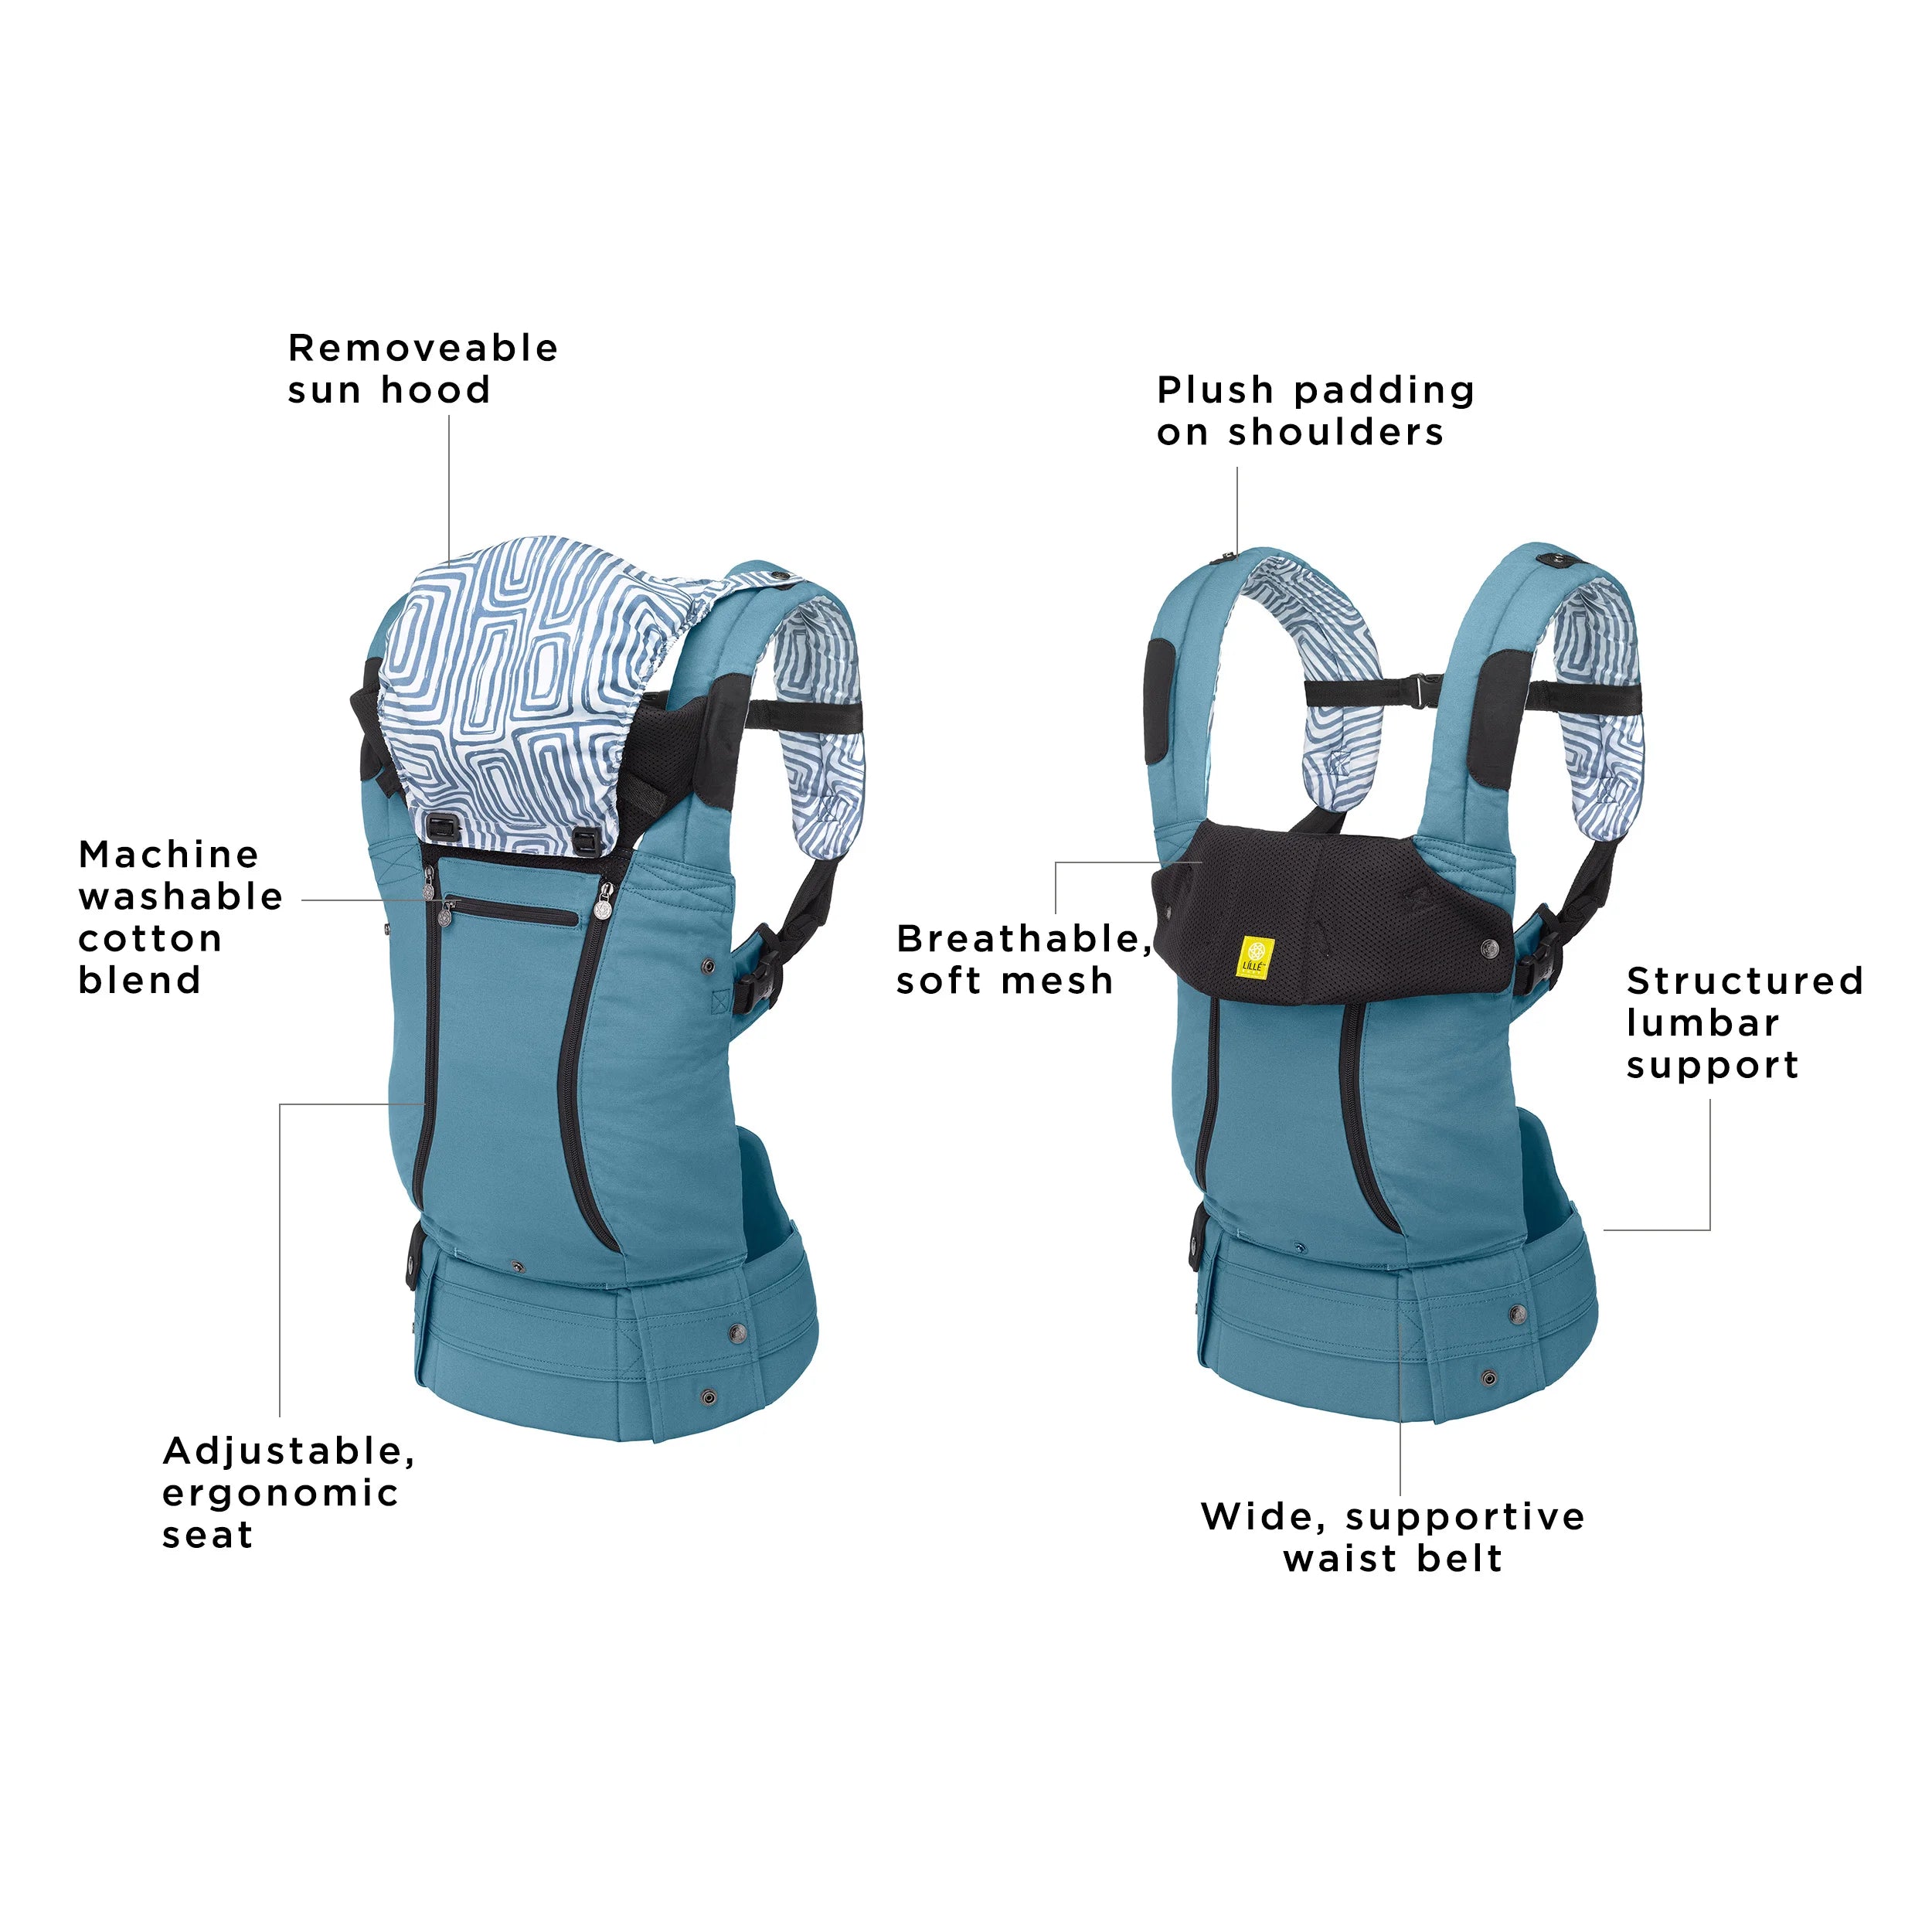 complete all seasons has a removeable sun hood, machine washable cotton blend, adjustable ergonomic seat, plush padding on shoulders, breathable soft mesh, structured lumbar support, wide supportive waist belt